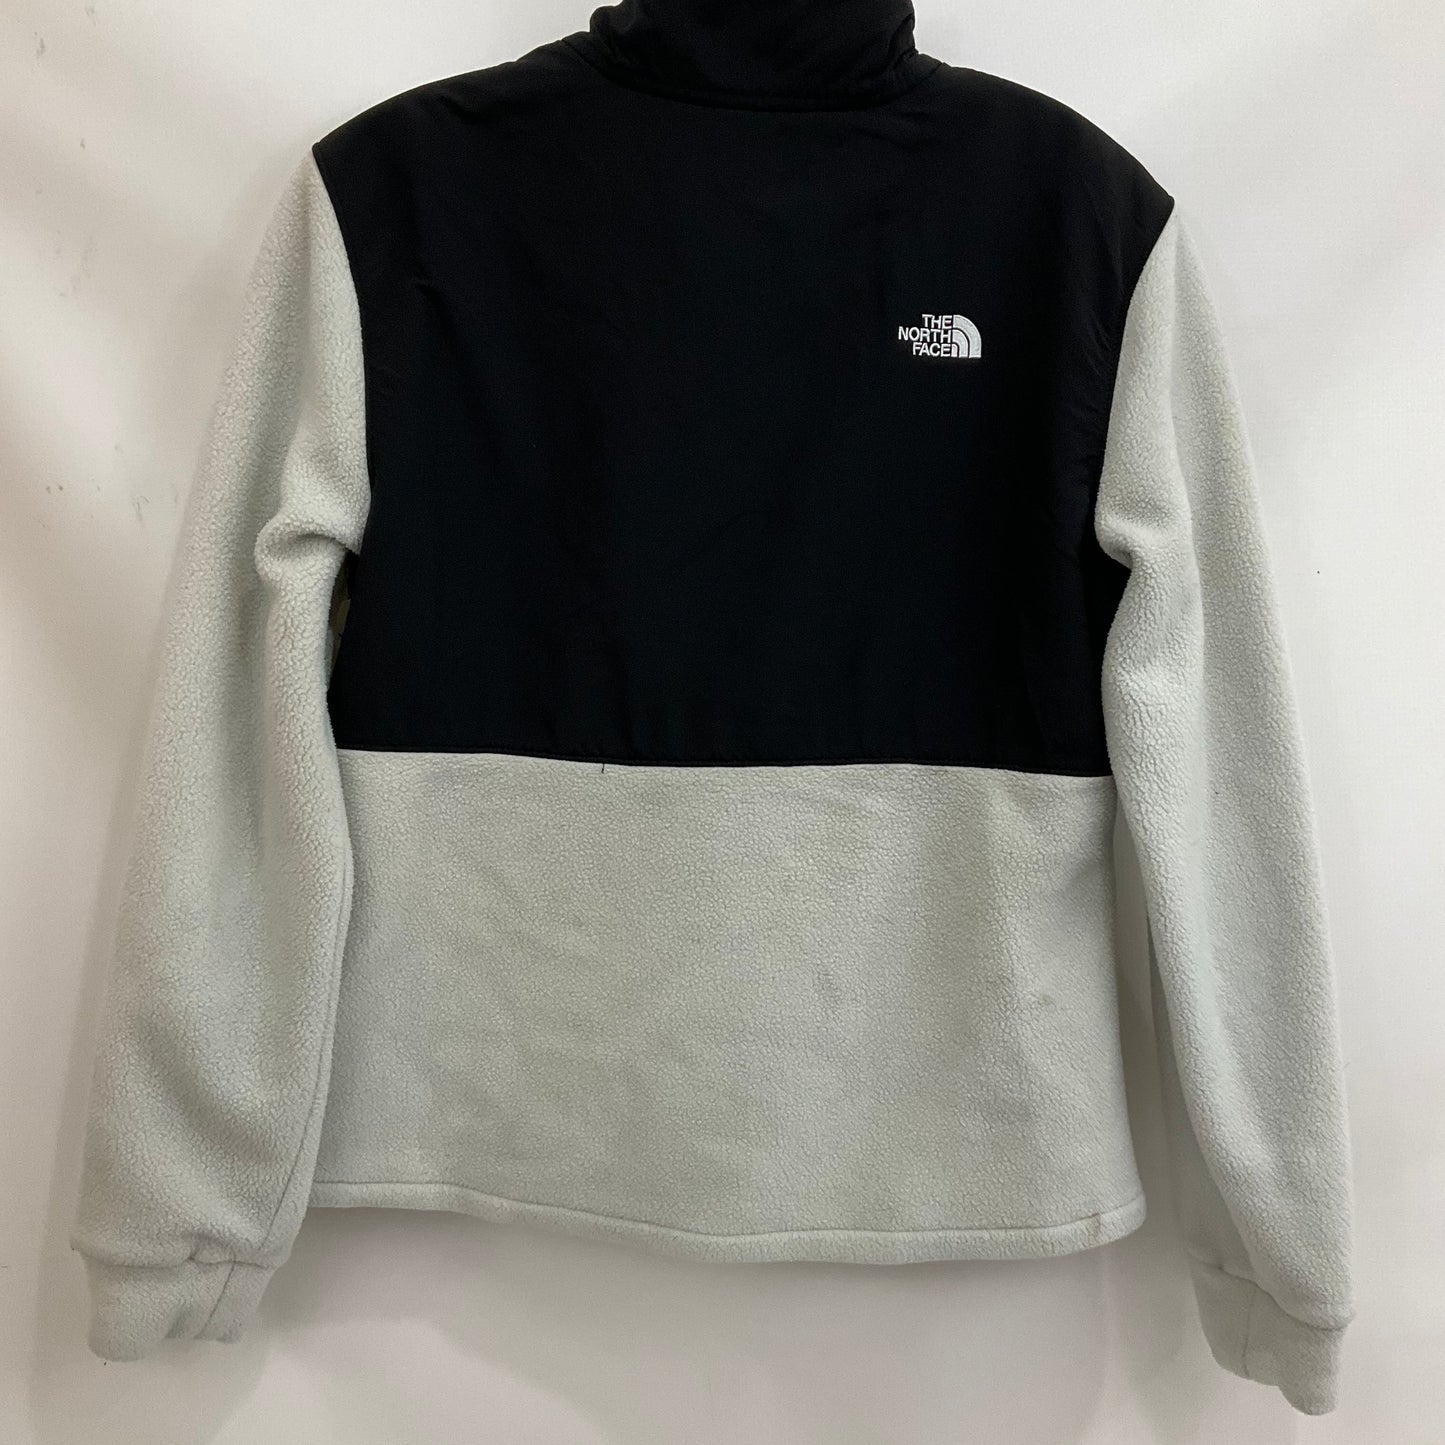 Jacket Fleece By North Face  Size: L